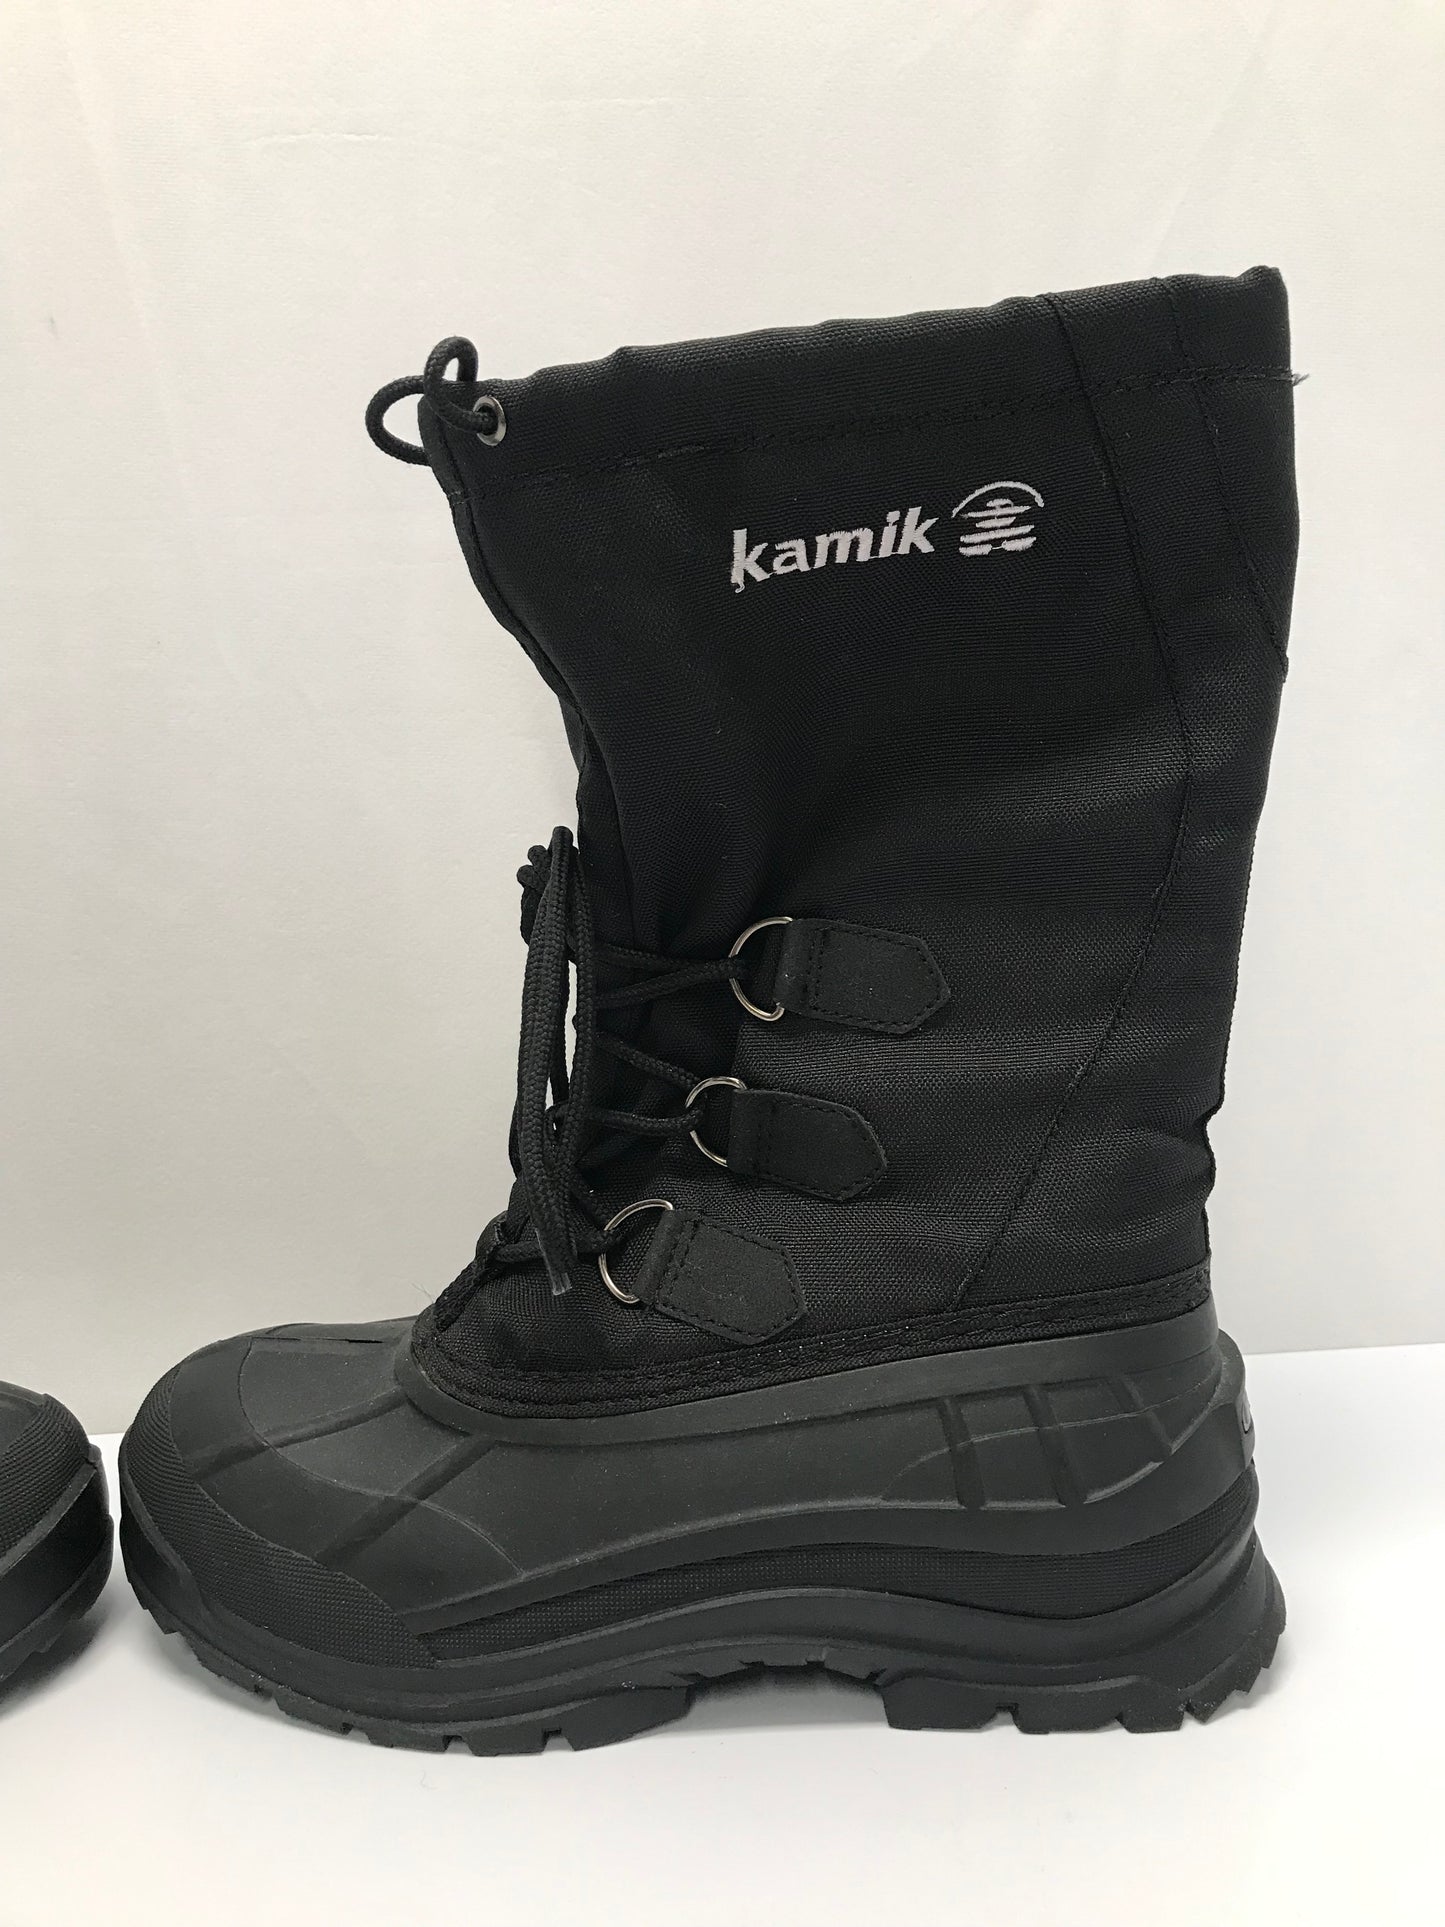 Winter Boots Ladies Size 8 Kamik Black With Liners New Demo Model